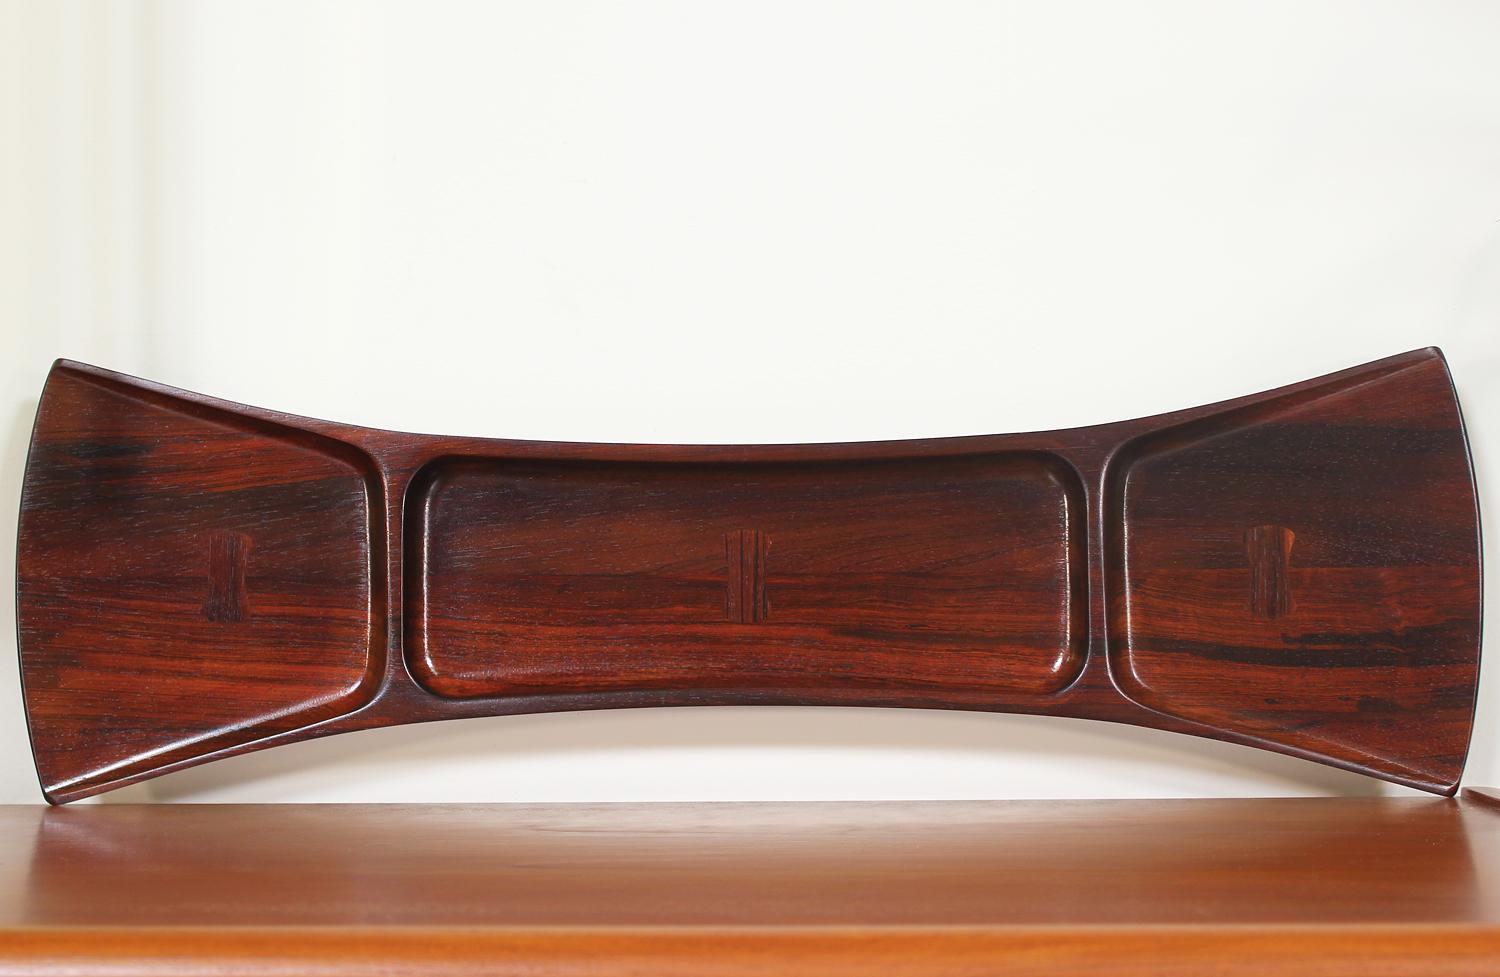 Stylish tray designed by Jens H. Quistgaard for Dansk in Denmark circa 1960’s. Impeccably crafted in palisander rosewood, this sculptural serving tray features a bow tie shape with three divisions adorned with butterfly inlay within each section.